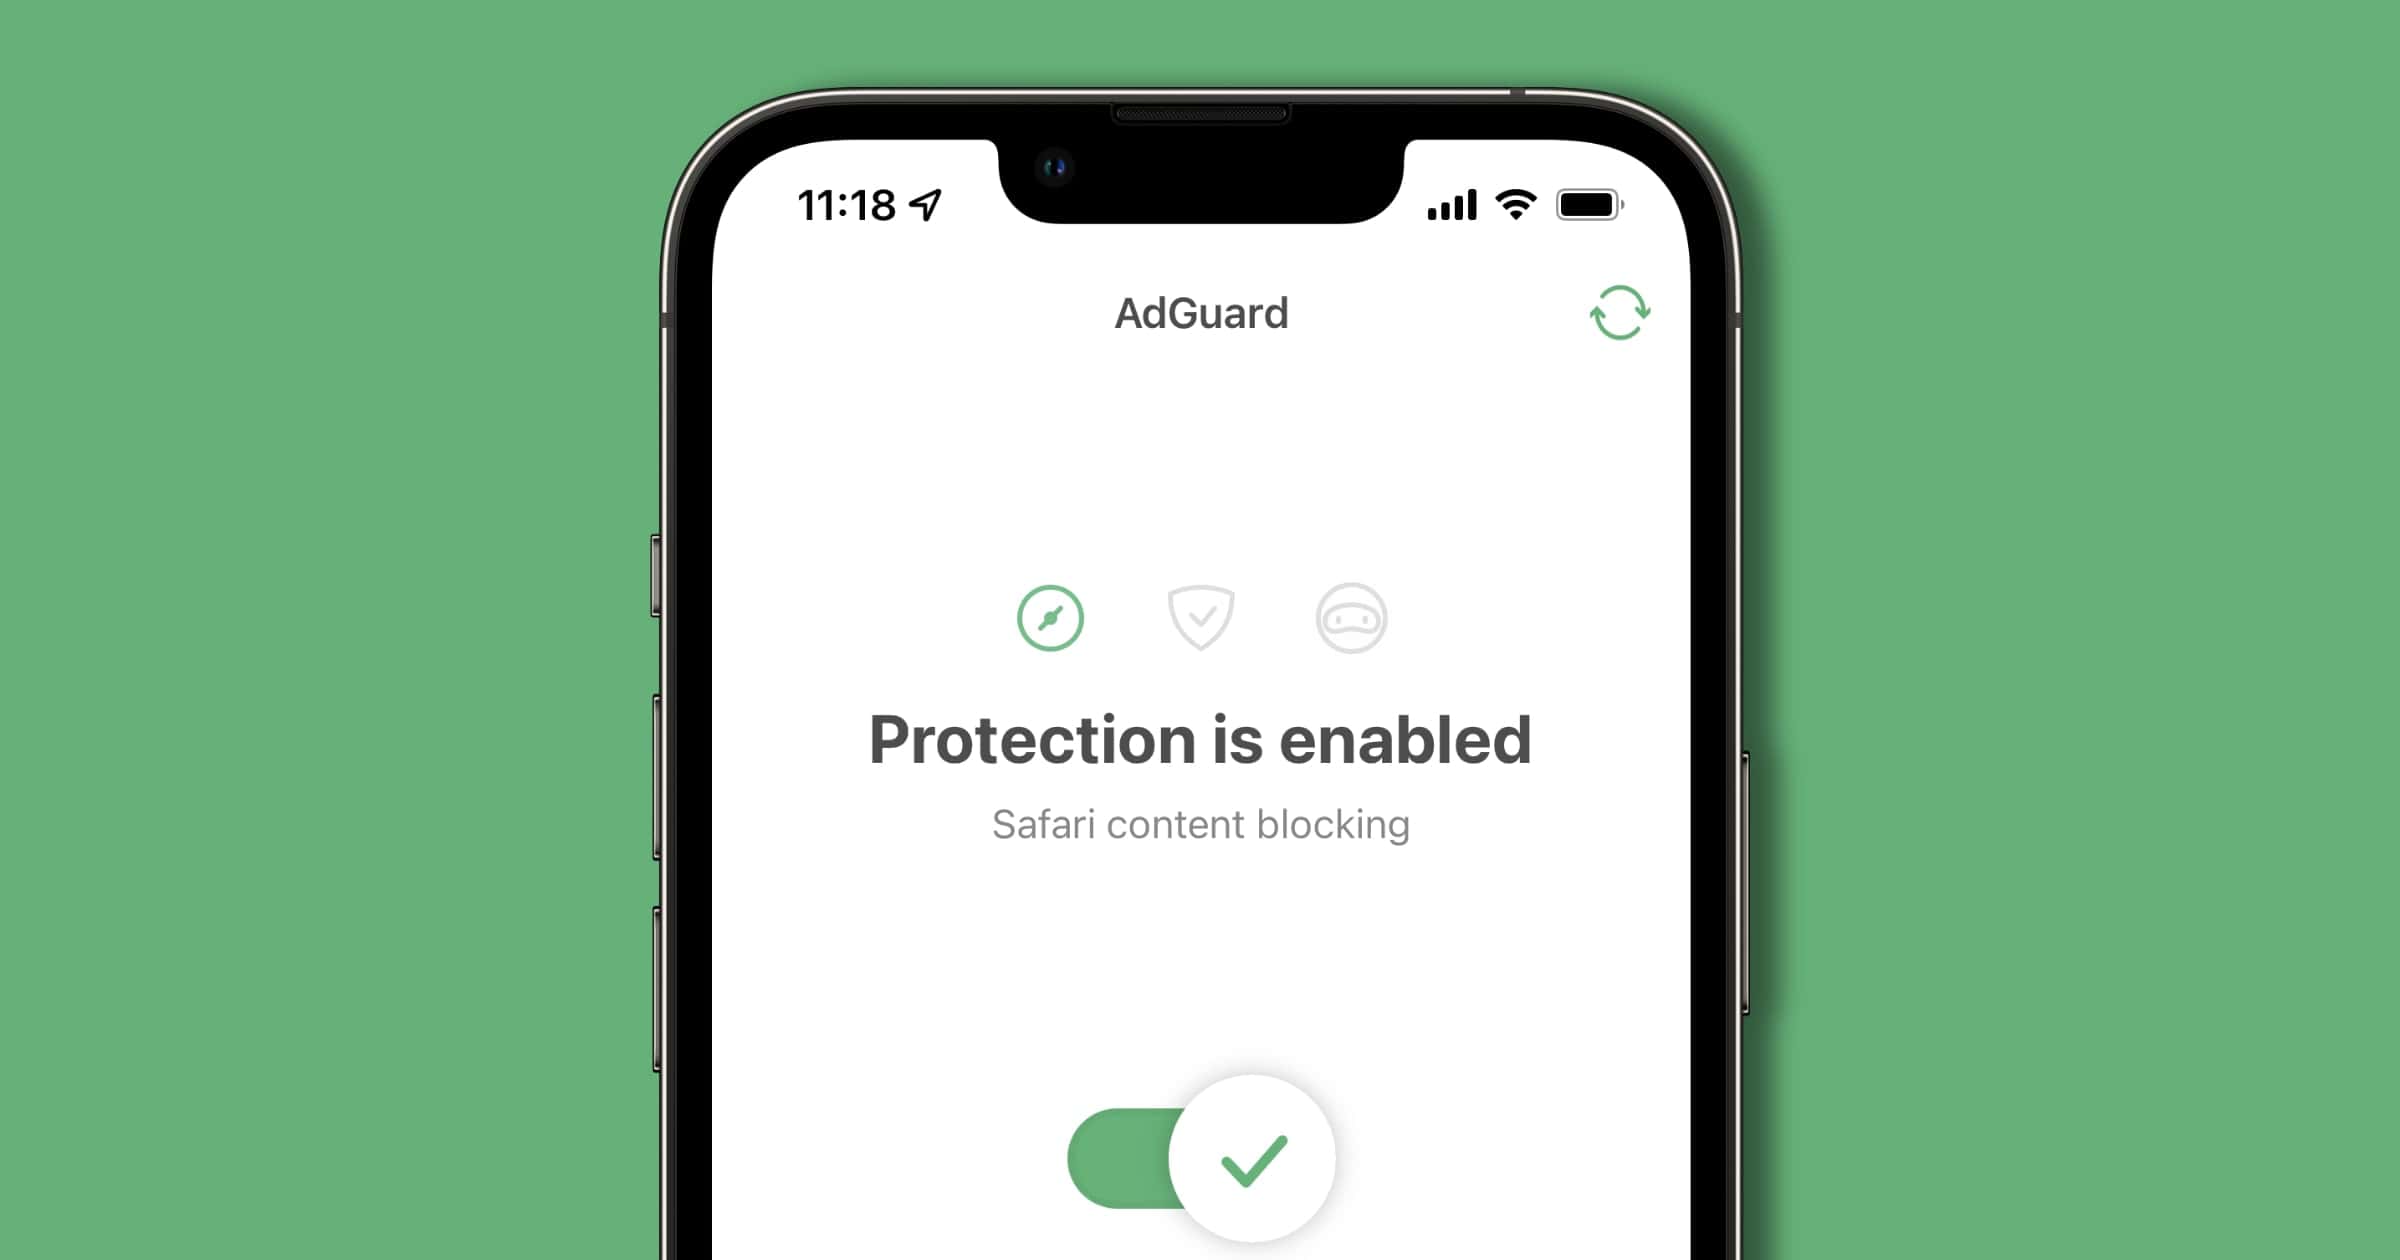 Sale: AdGuard’s Family Plan is Now Just $29, Down From $129